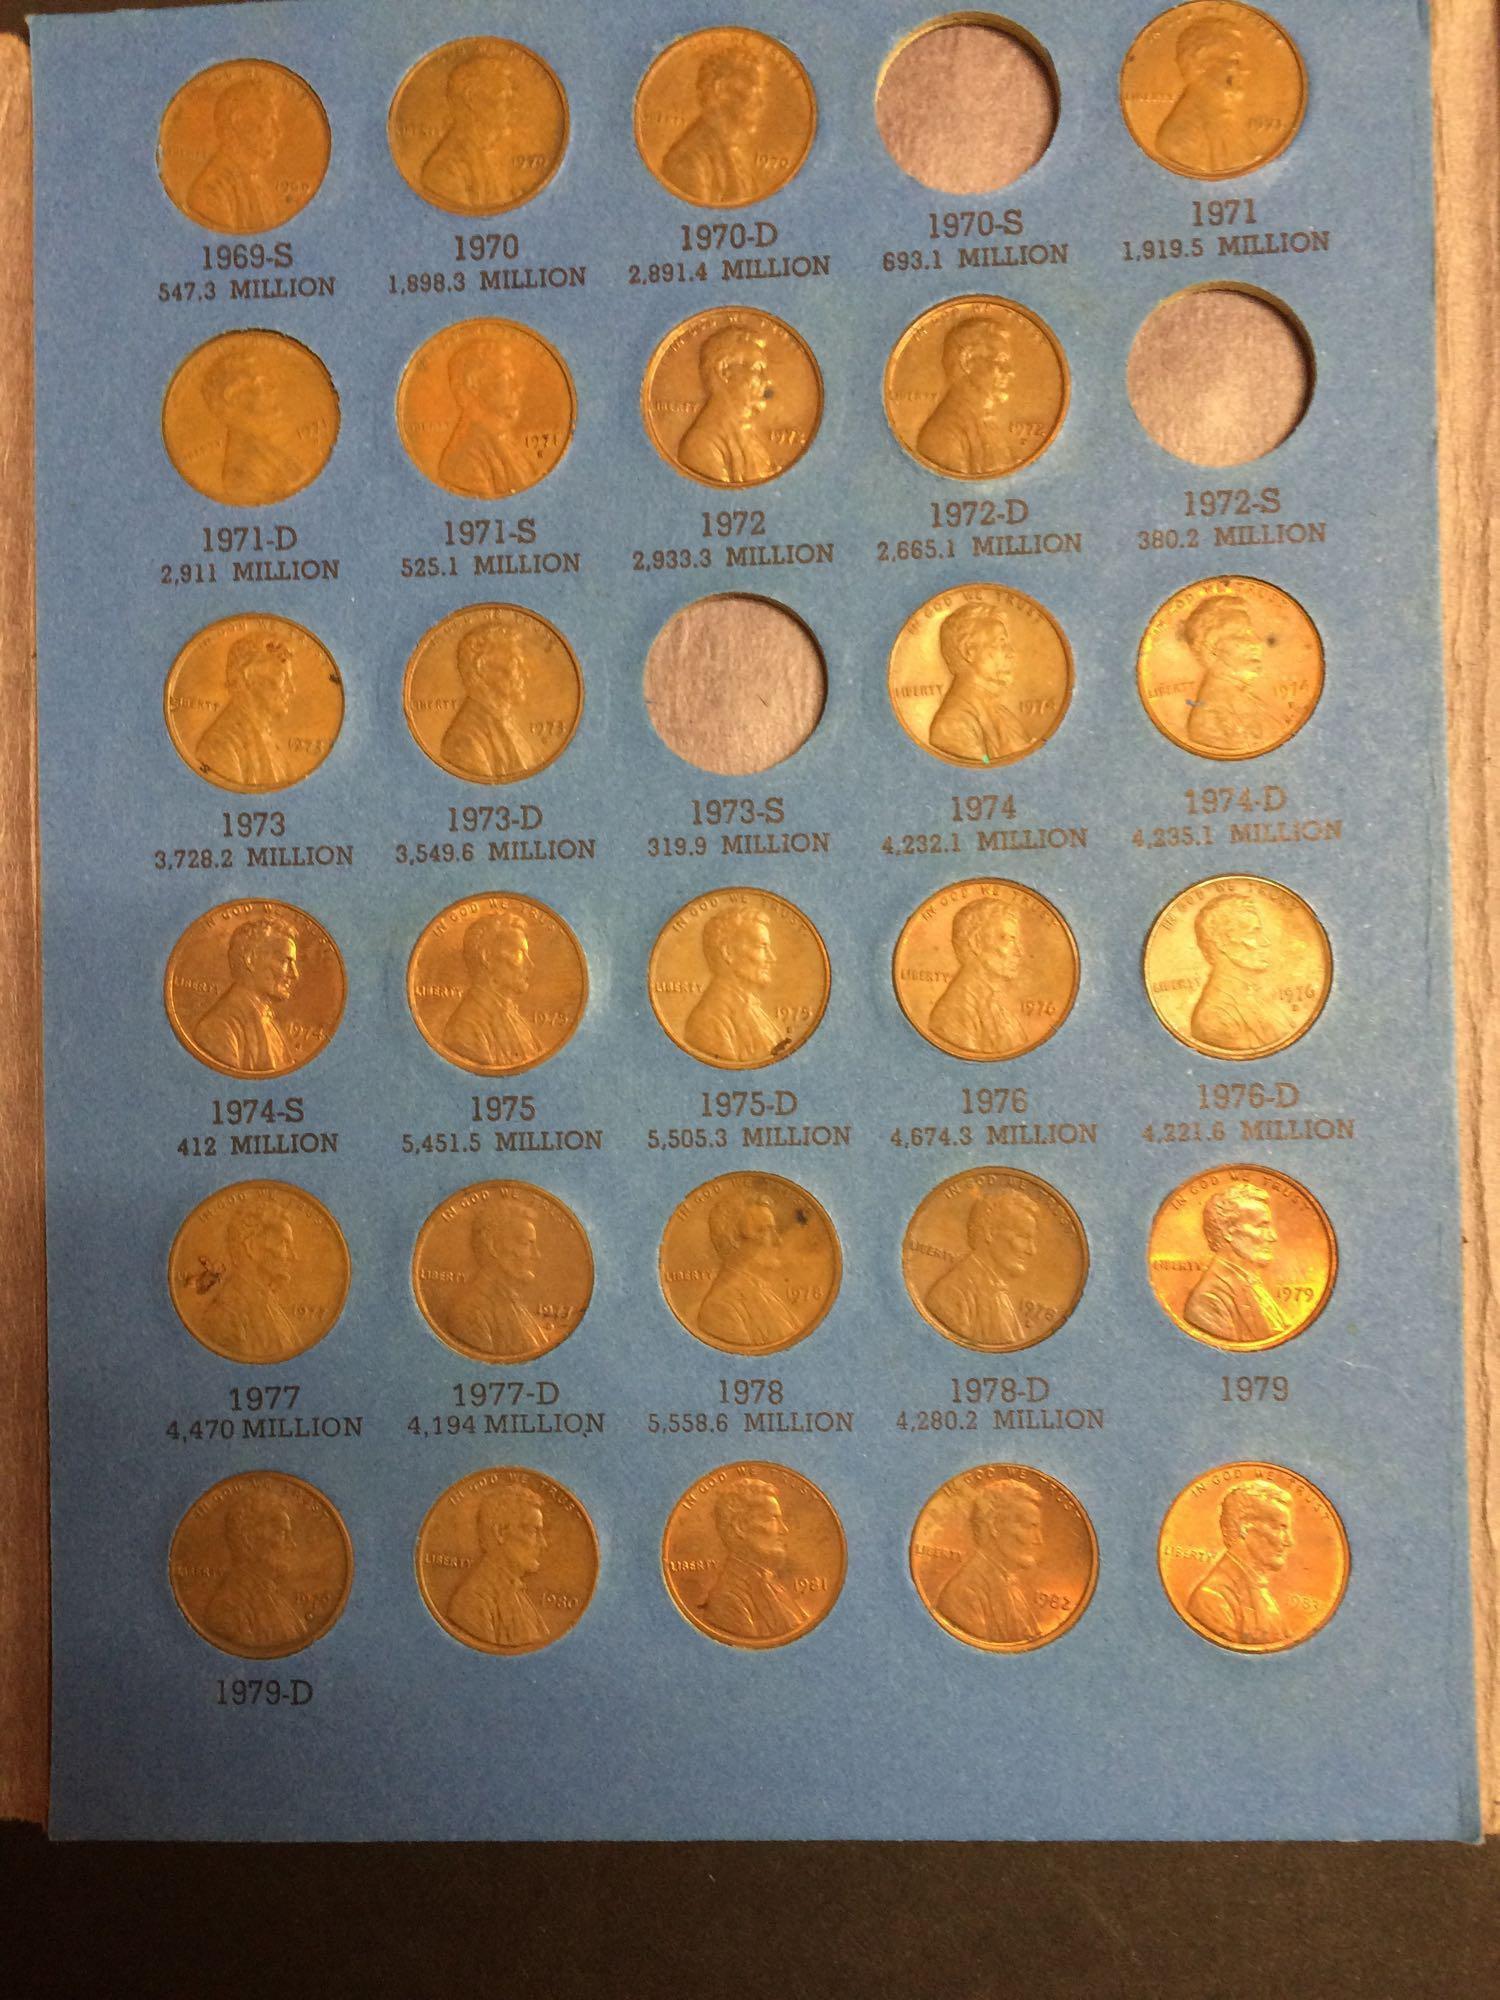 Lot of Lincoln Memorial pennies 1959 through 1991 total of 53